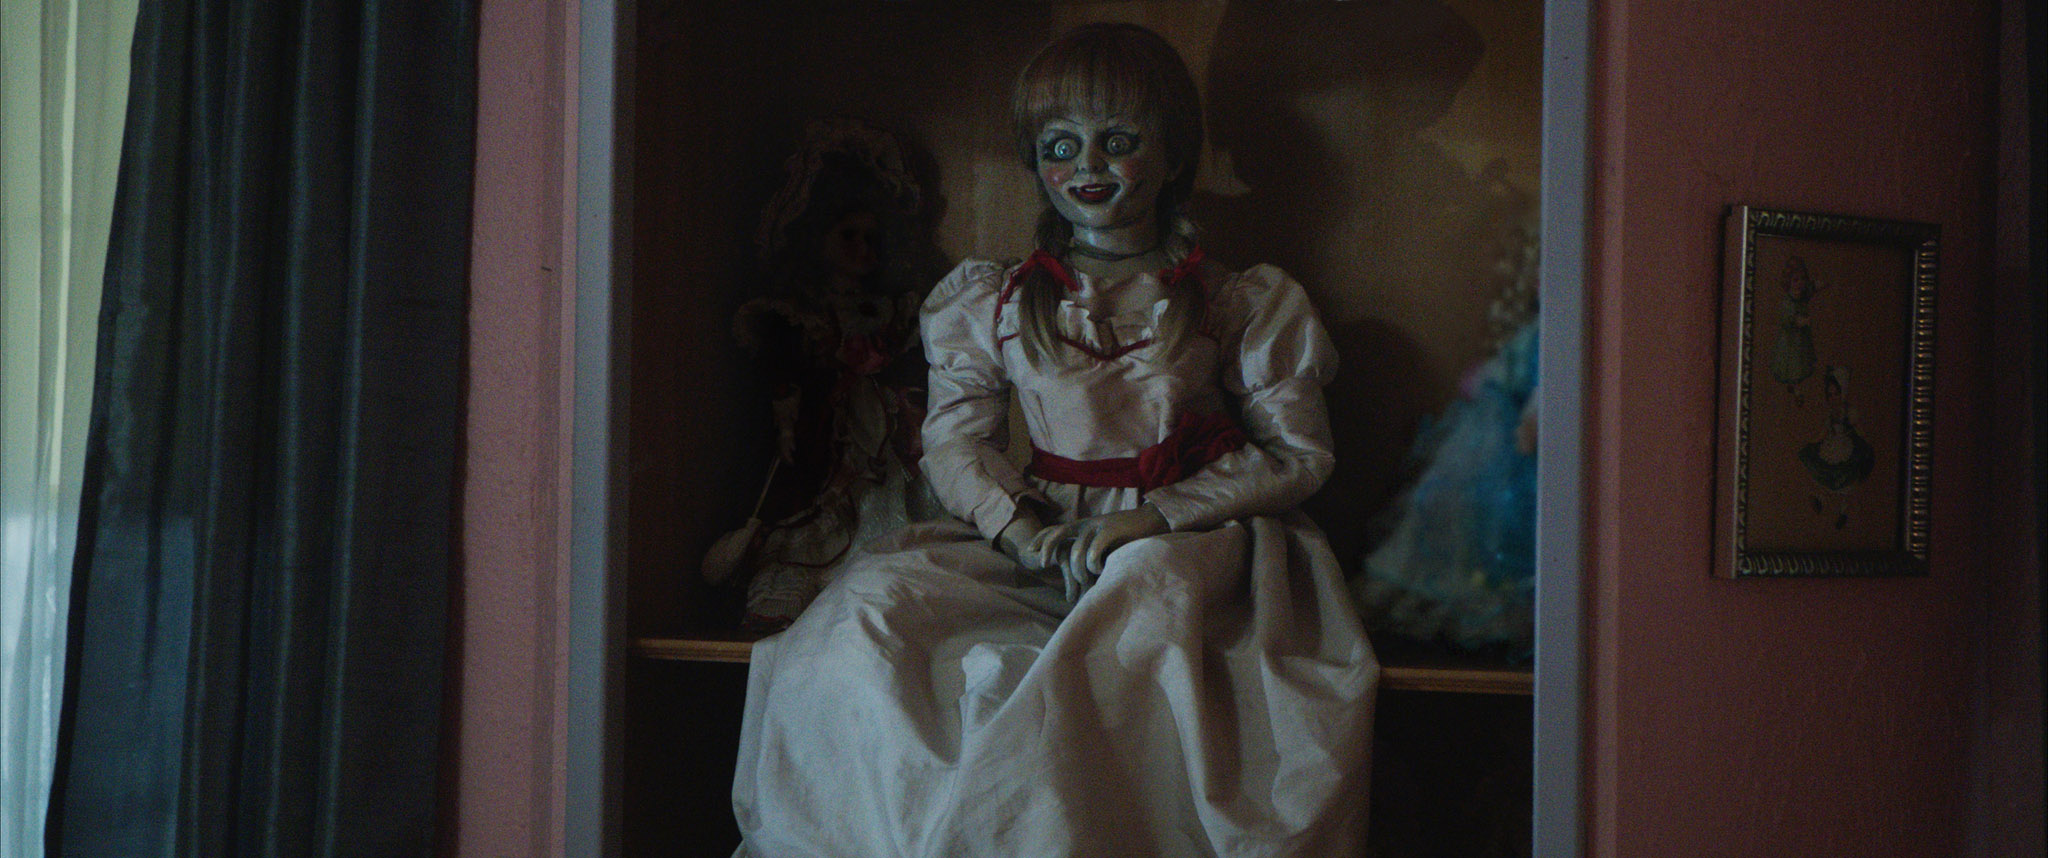 Annabelle - The Conjuring, Images 2014